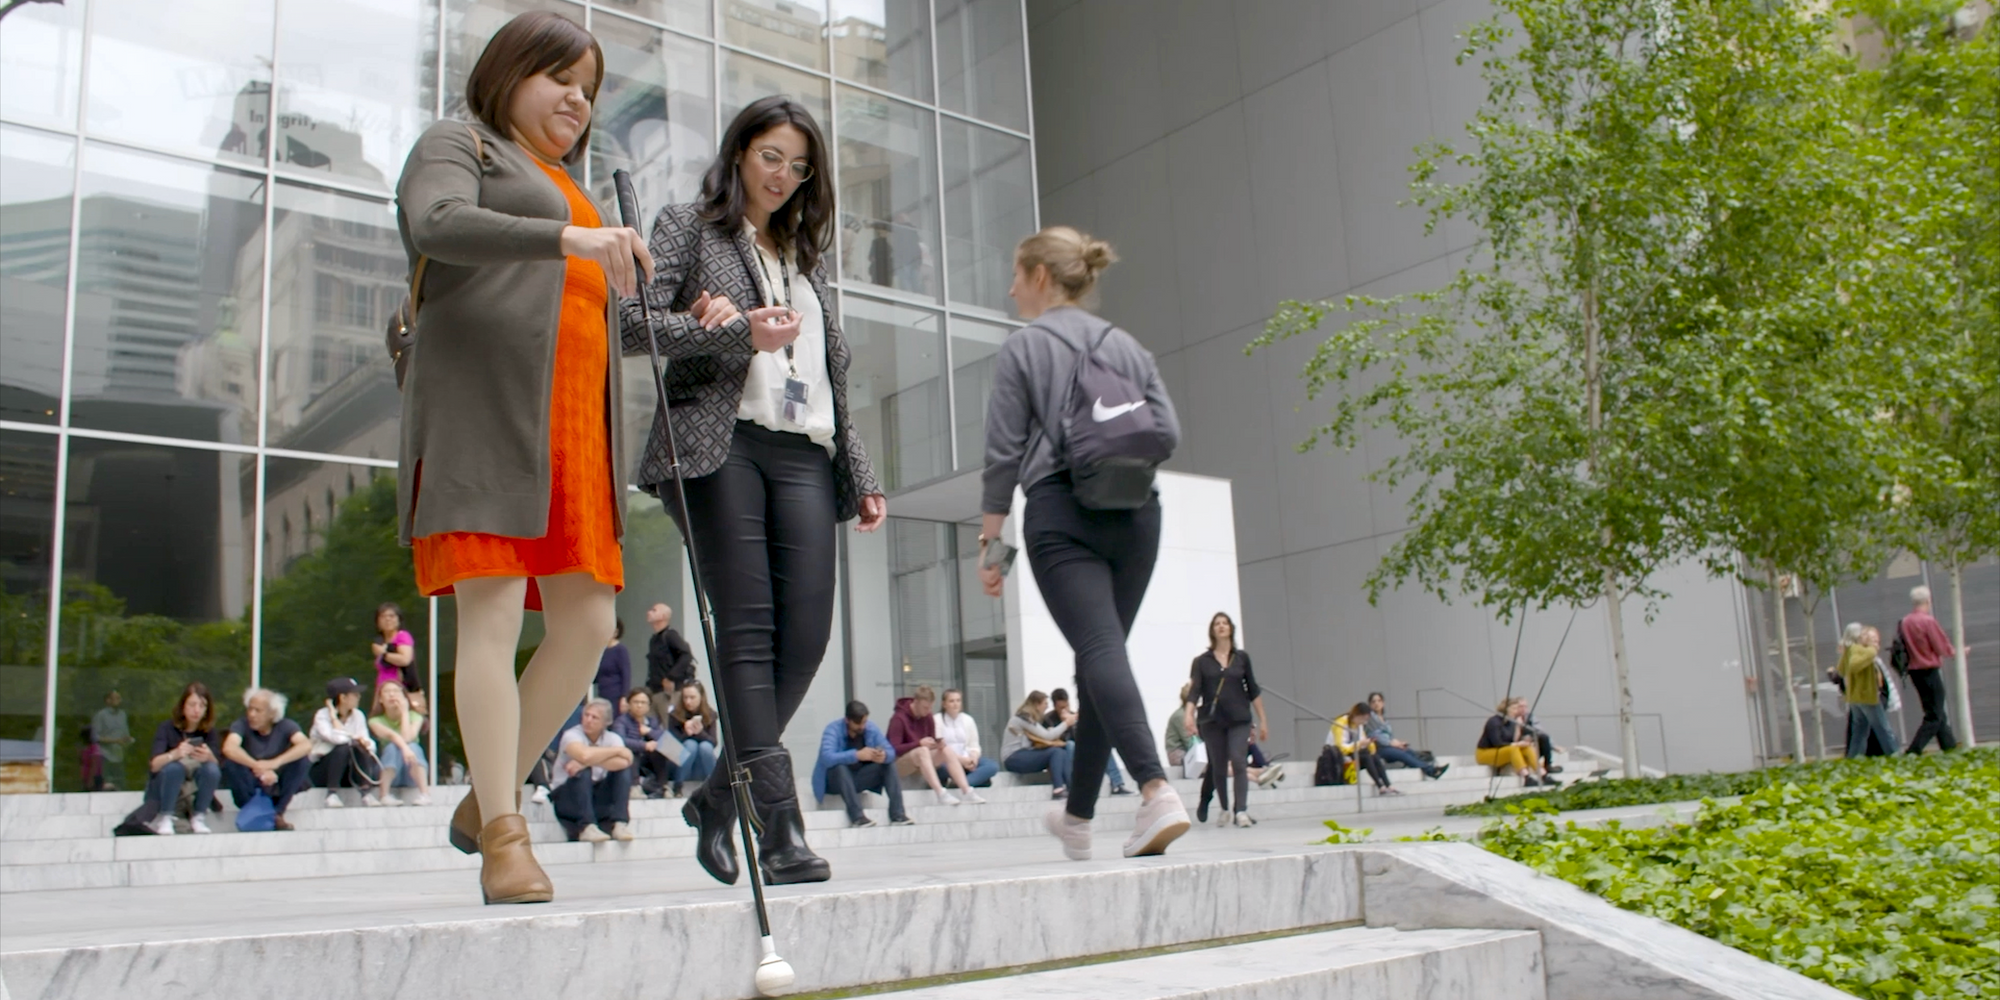 Nefertiti Matos walks with a sighted guide in MoMA’s Sculpture Garden. Video still image by J6 MediaWorks, from Disability Equality and Museums Episode 7: Meet Nefertiti. Image description: Two women walk together down the steps of MoMA’s sculpture garden, with their arms linked. The woman to the left wears an orange dress and extends a long black cane in front of her. The other woman wears black pants and boots. Both women look downward.